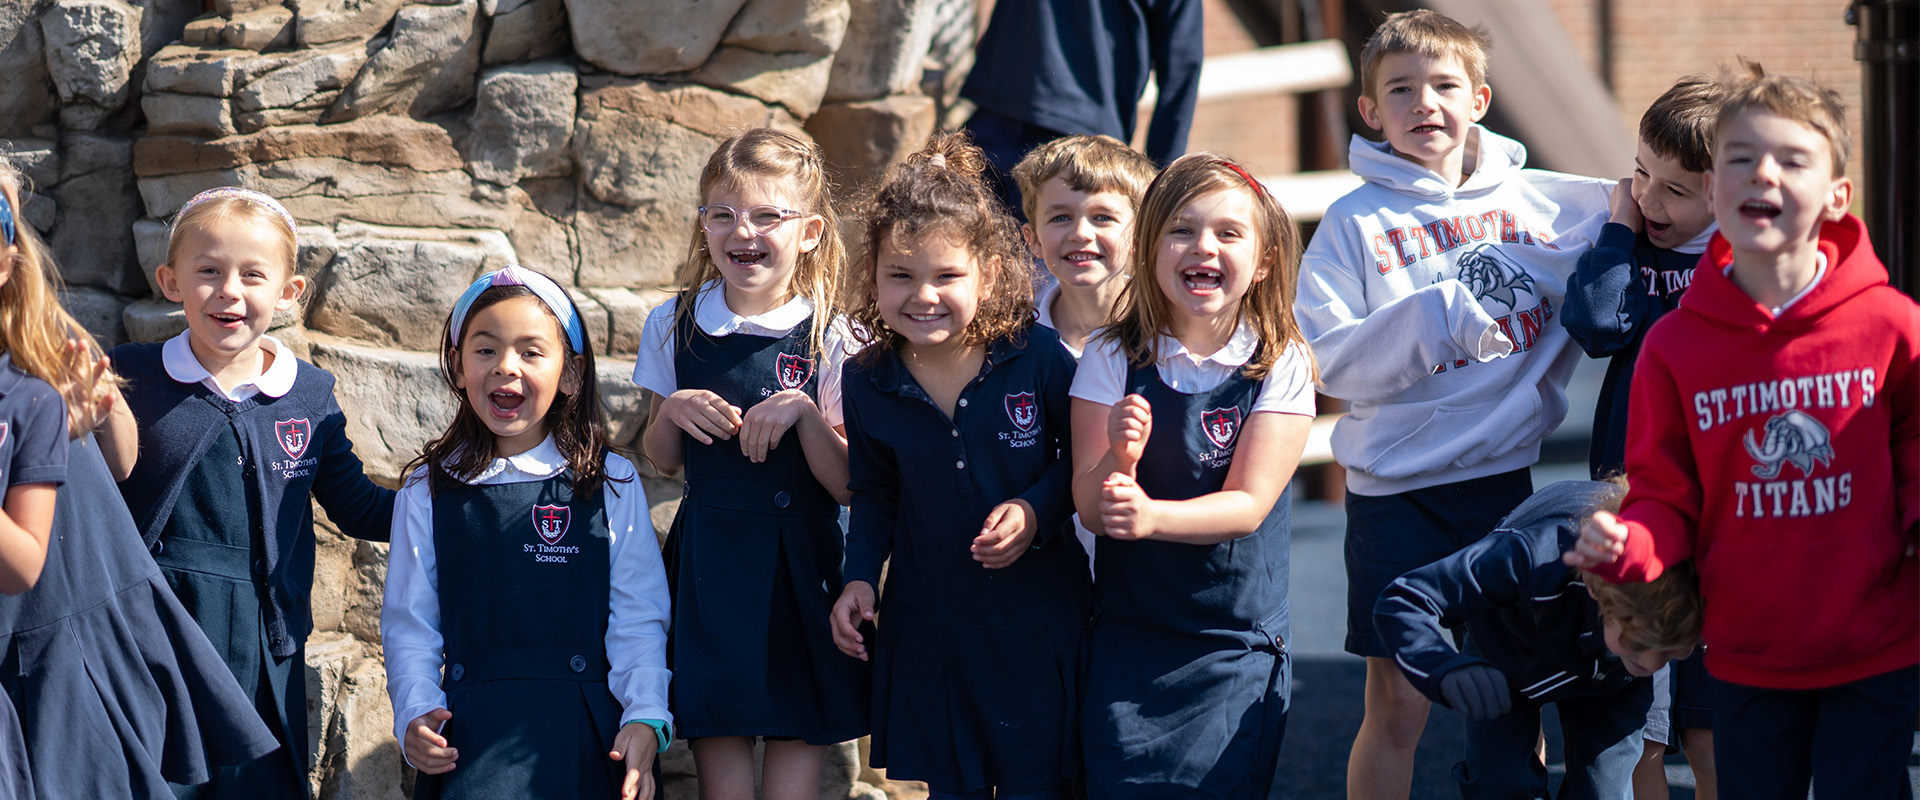 Group of St. Timothy's students smiling on the playground